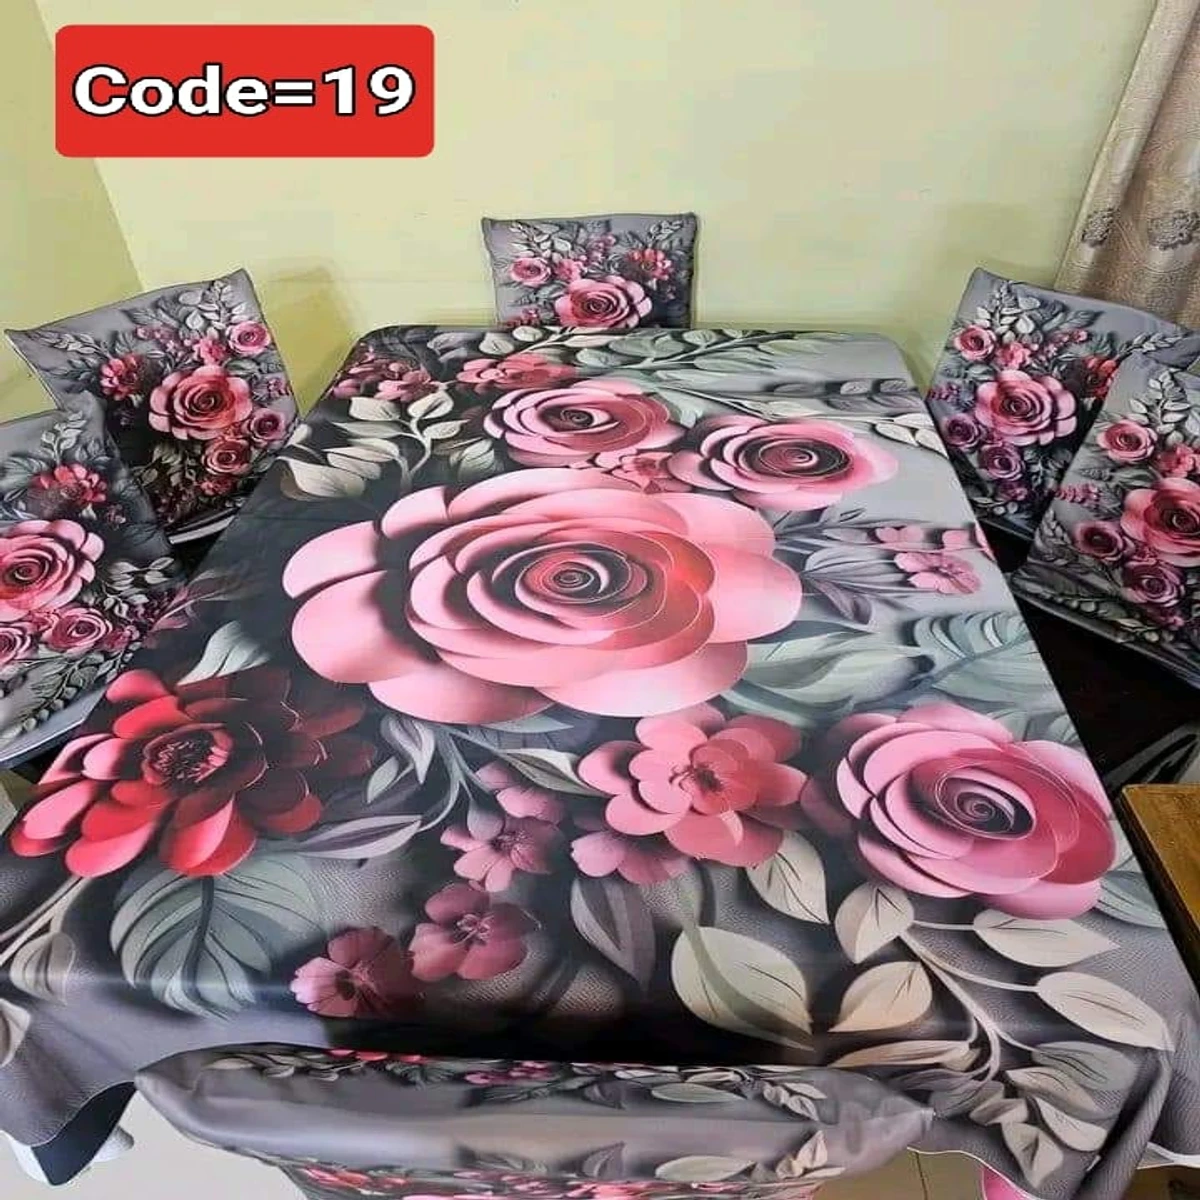 3D Pint Dining Table and Chair Cover Code=19